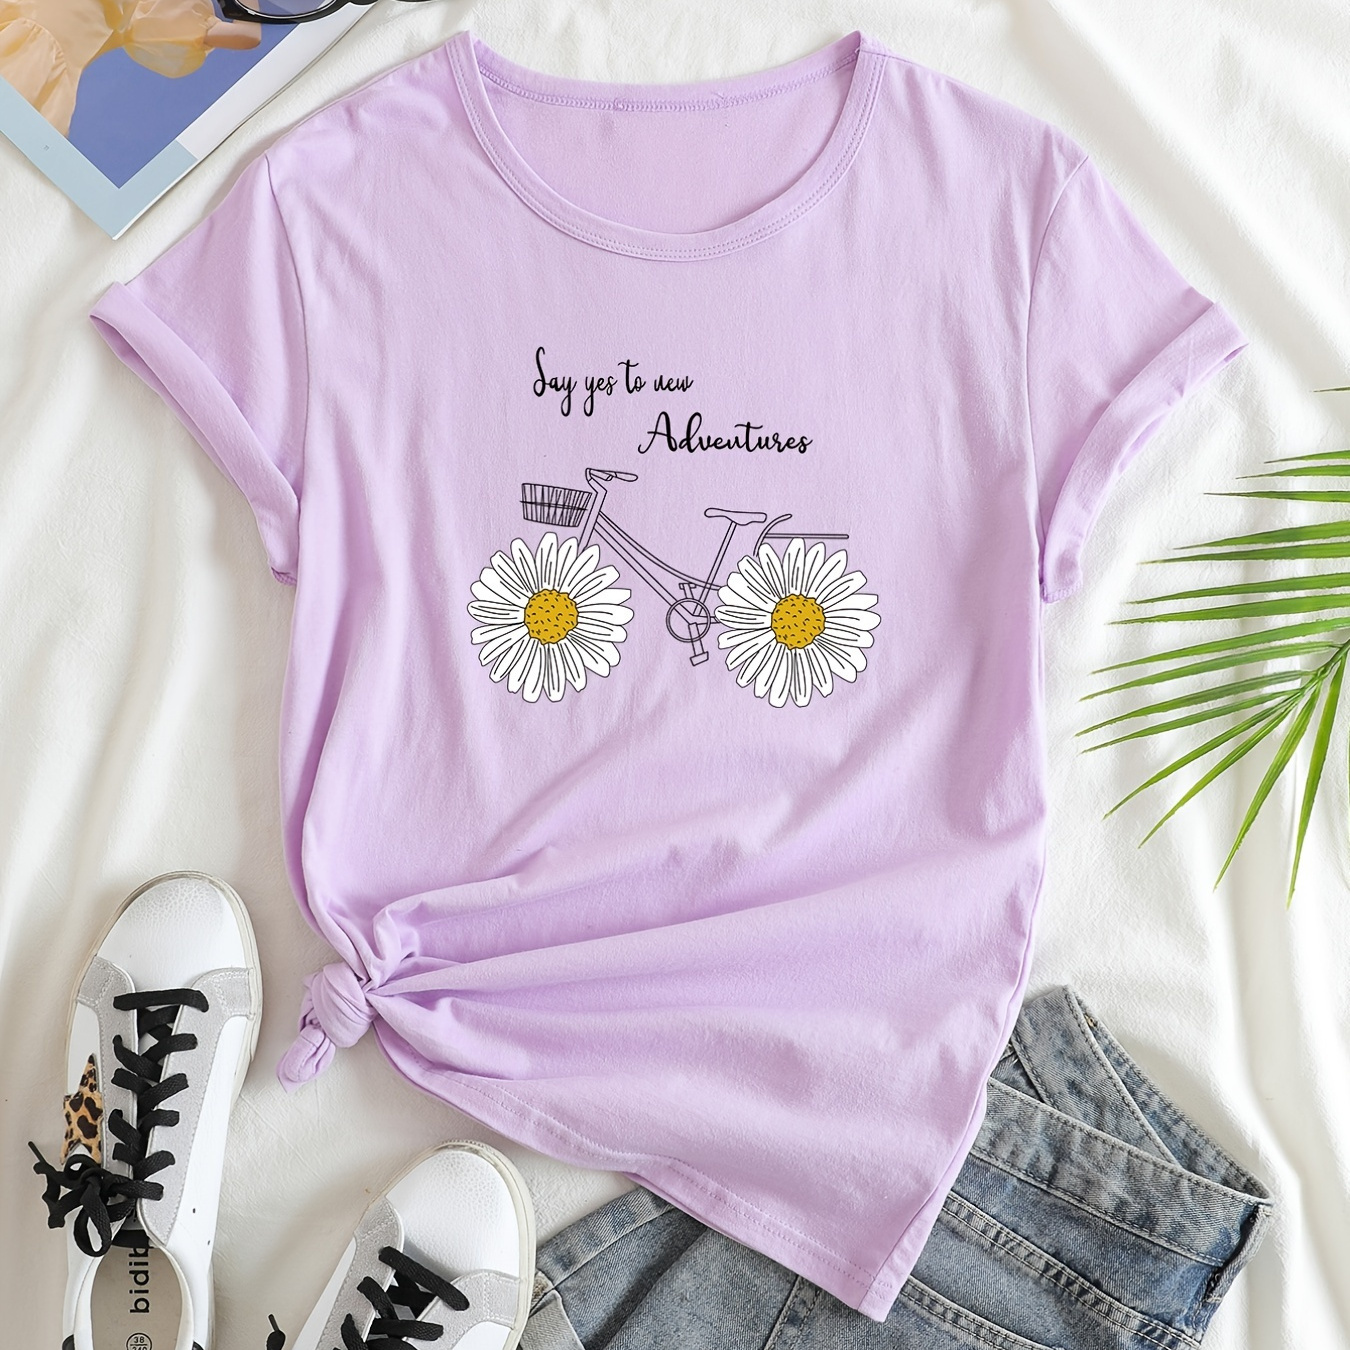 

Letter Print Crew Neck T-shirt, Casual Loose Short Sleeve Fashion Summer T-shirts Tops, Women's Clothing